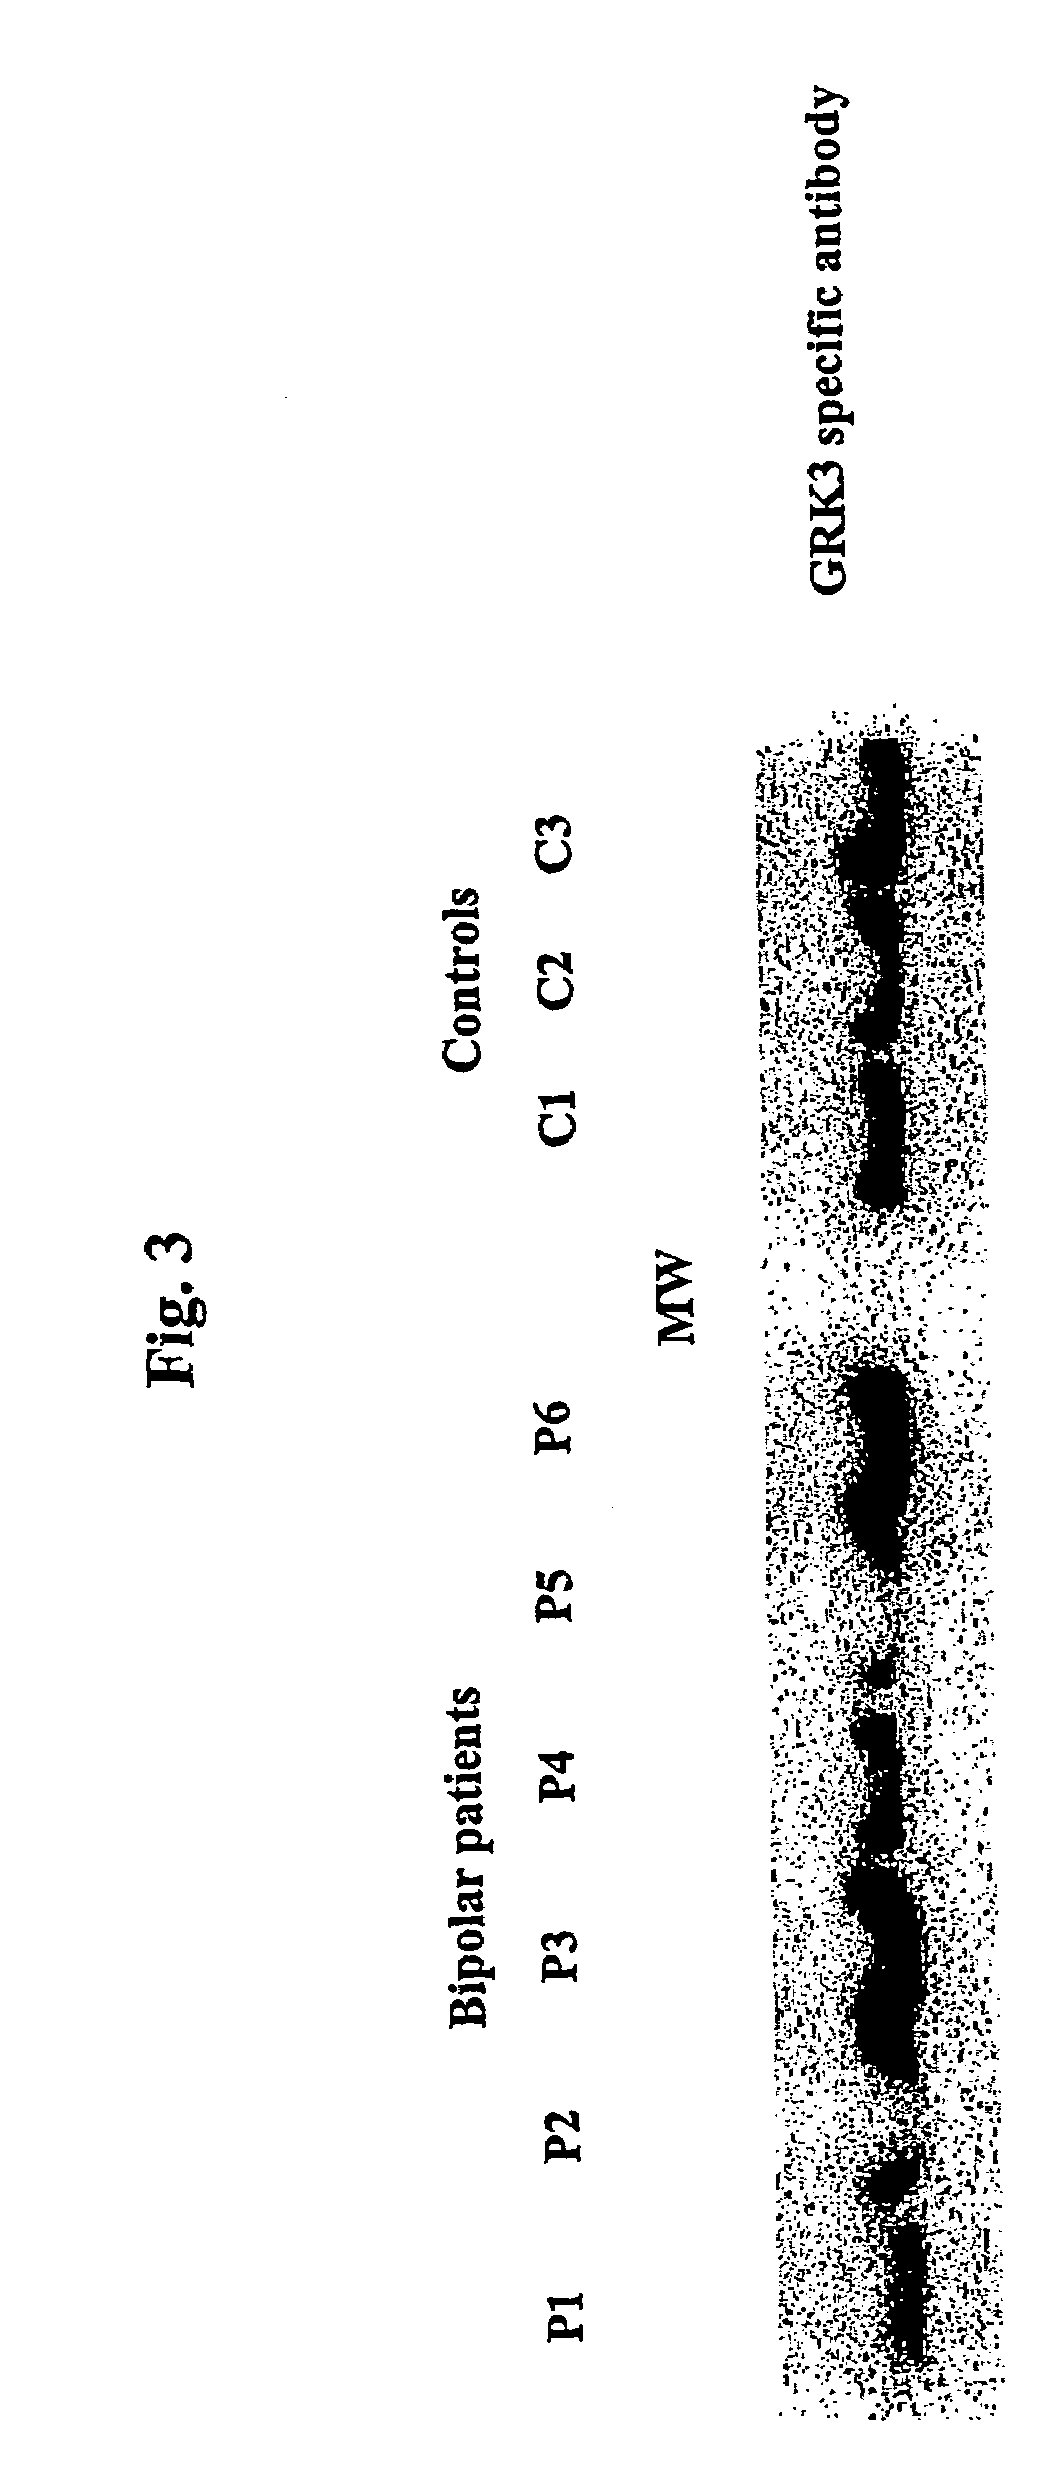 Methods for diagnosis and treatment of psychiatric disorders